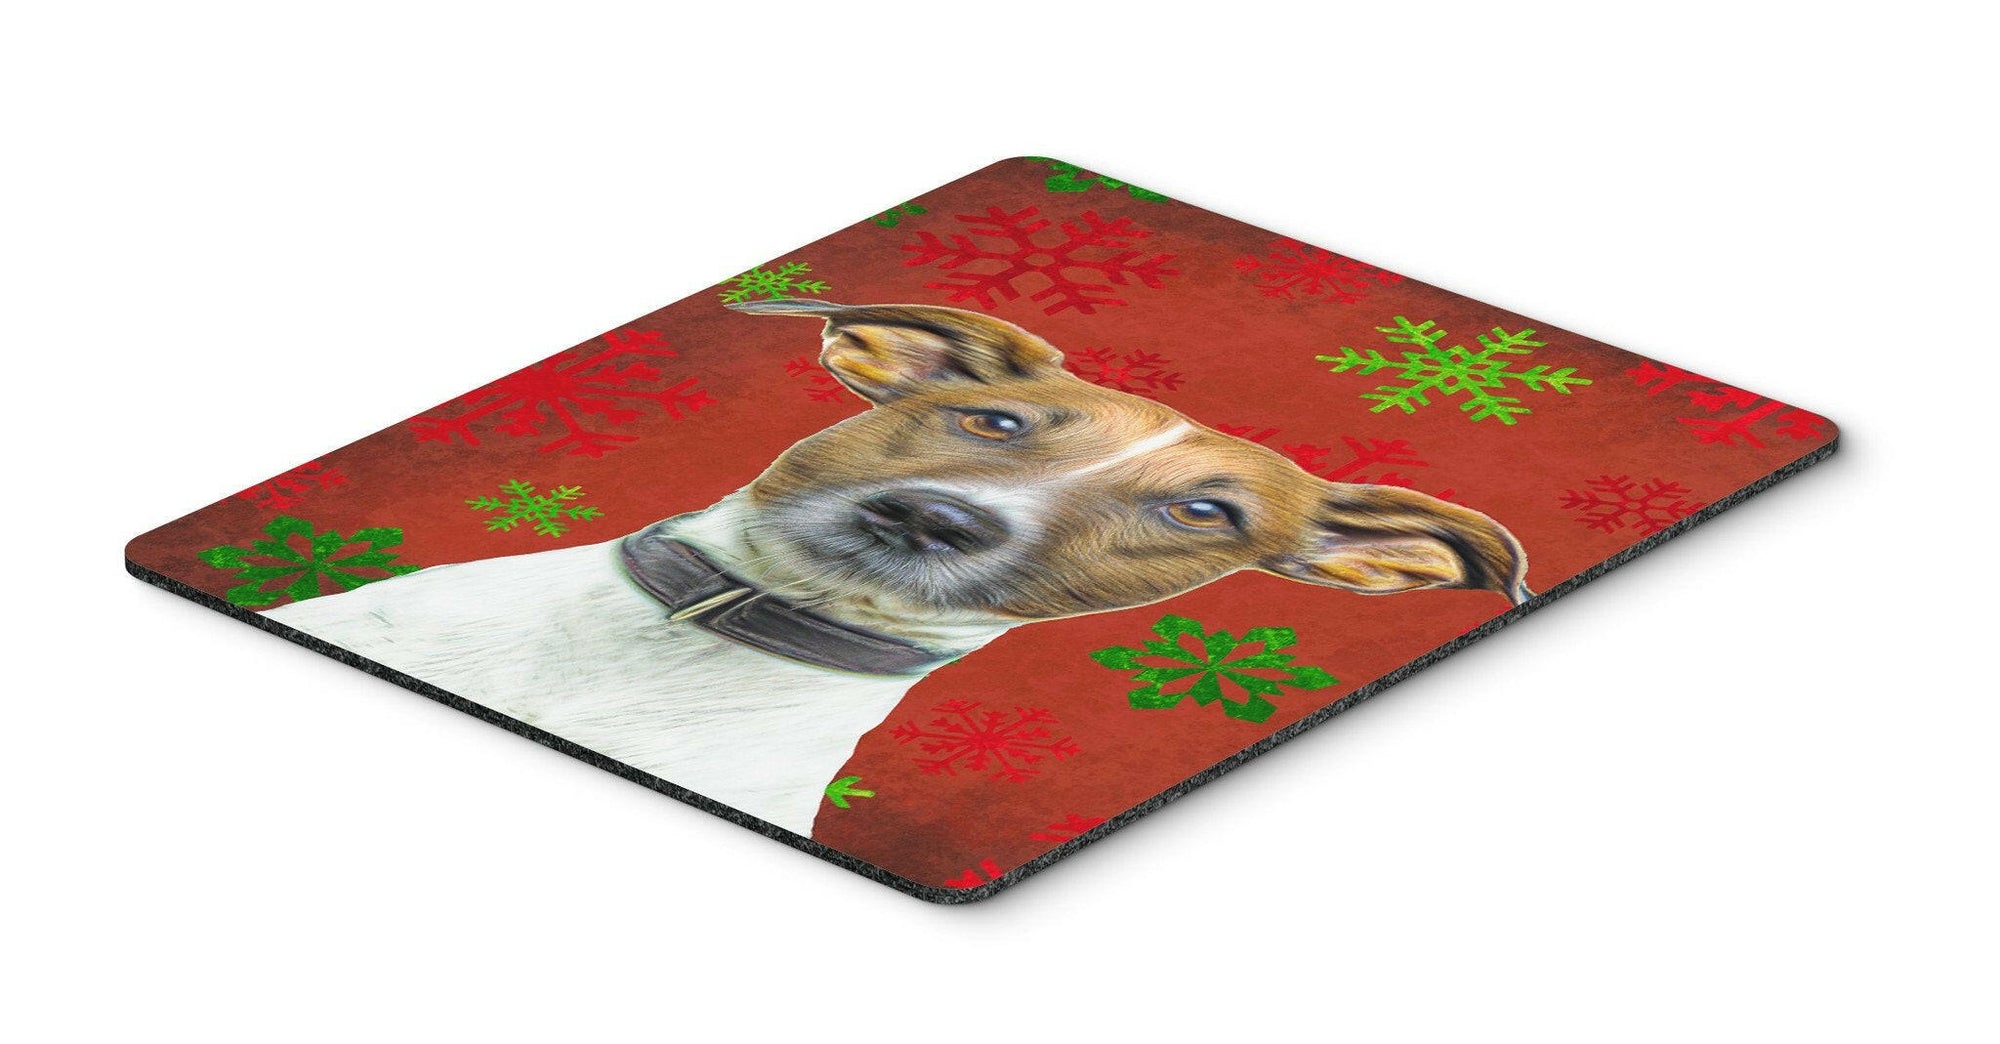 Red Snowflakes Holiday Christmas  Jack Russell Terrier Mouse Pad, Hot Pad or Trivet KJ1183MP by Caroline's Treasures